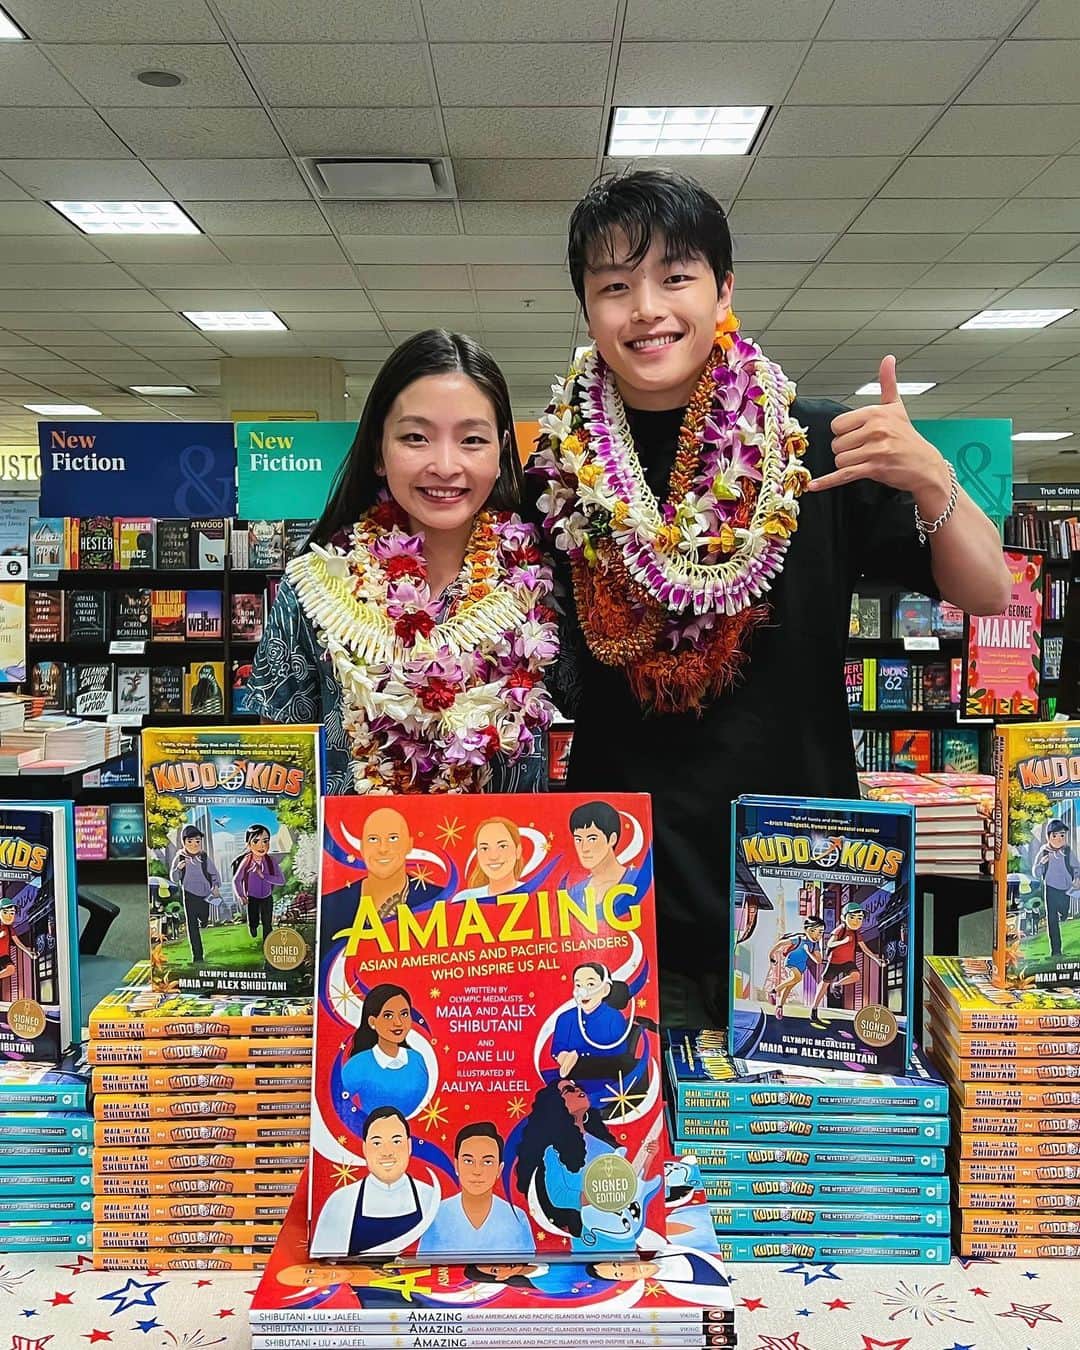 マイア・シブタニのインスタグラム：「Yesterday’s #AmazingAAPI book tour kick-off event was incredible!   While I knew that it was going to be the first event of our Amazing: Asian Americans and Pacific Islanders Who Inspire Us All book tour, I realized when we arrived at @bnalamoana that it was ALSO our first public book event ever! *Our #KudoKids books came out during the height of the pandemic in 2020 and 2021 when in-person events were not possible.  The event started at 2pm and we didn’t end up leaving the store until after 7pm. To all of our friends and supporters, THANK YOU for taking the time to come out and see us. Standing in line were individuals, families, groups of friends, teachers (so many!), skaters (shoutout to the wonderful community at @icepalacehawaii), and fans who have been cheering us on since 2009! Many of you waited in line for over 3 hours!! We are so humbled and honored that the Honolulu community came out to support us and this book—special shoutout to @usjapancouncil, @jcchawaii, and @pigandthelady for spreading the word about our visit to the island.  Thank you for ALL of the beautiful leis, snacks, food recs, cards, and gifts. We enjoyed meeting and talking to each and every one of you. I especially appreciated the kind words about our books, skating, and thoughtful check-ins on my health. 🧡  Alex and I are really passionate and intentional about everything we do and believe in the power and possibilities of this new book, AMAZING. Our hope is that it can be a game changer for AAPI representation in kid’s literature, as well as advance the ongoing effort for AAPI history inclusion in K-12 curriculum across the United States.   To Haunani, Ross, and rest of the wonderful B&N staff, thank you for hosting us. The beautiful window display at @alamoanacenter was our FIRST and we will never forget it! 🤙  To Jenny, Dane, Aaliya, Opal, and the rest of the team at Viking + @penguinkids, thank you for your hard work and belief in this book. 🙏  To top it all off, part-way through our signing I got a very a special Twitter notification. More on that in my next post! 😉  The link to preorder AMAZING is in my bio! 🫶✨」